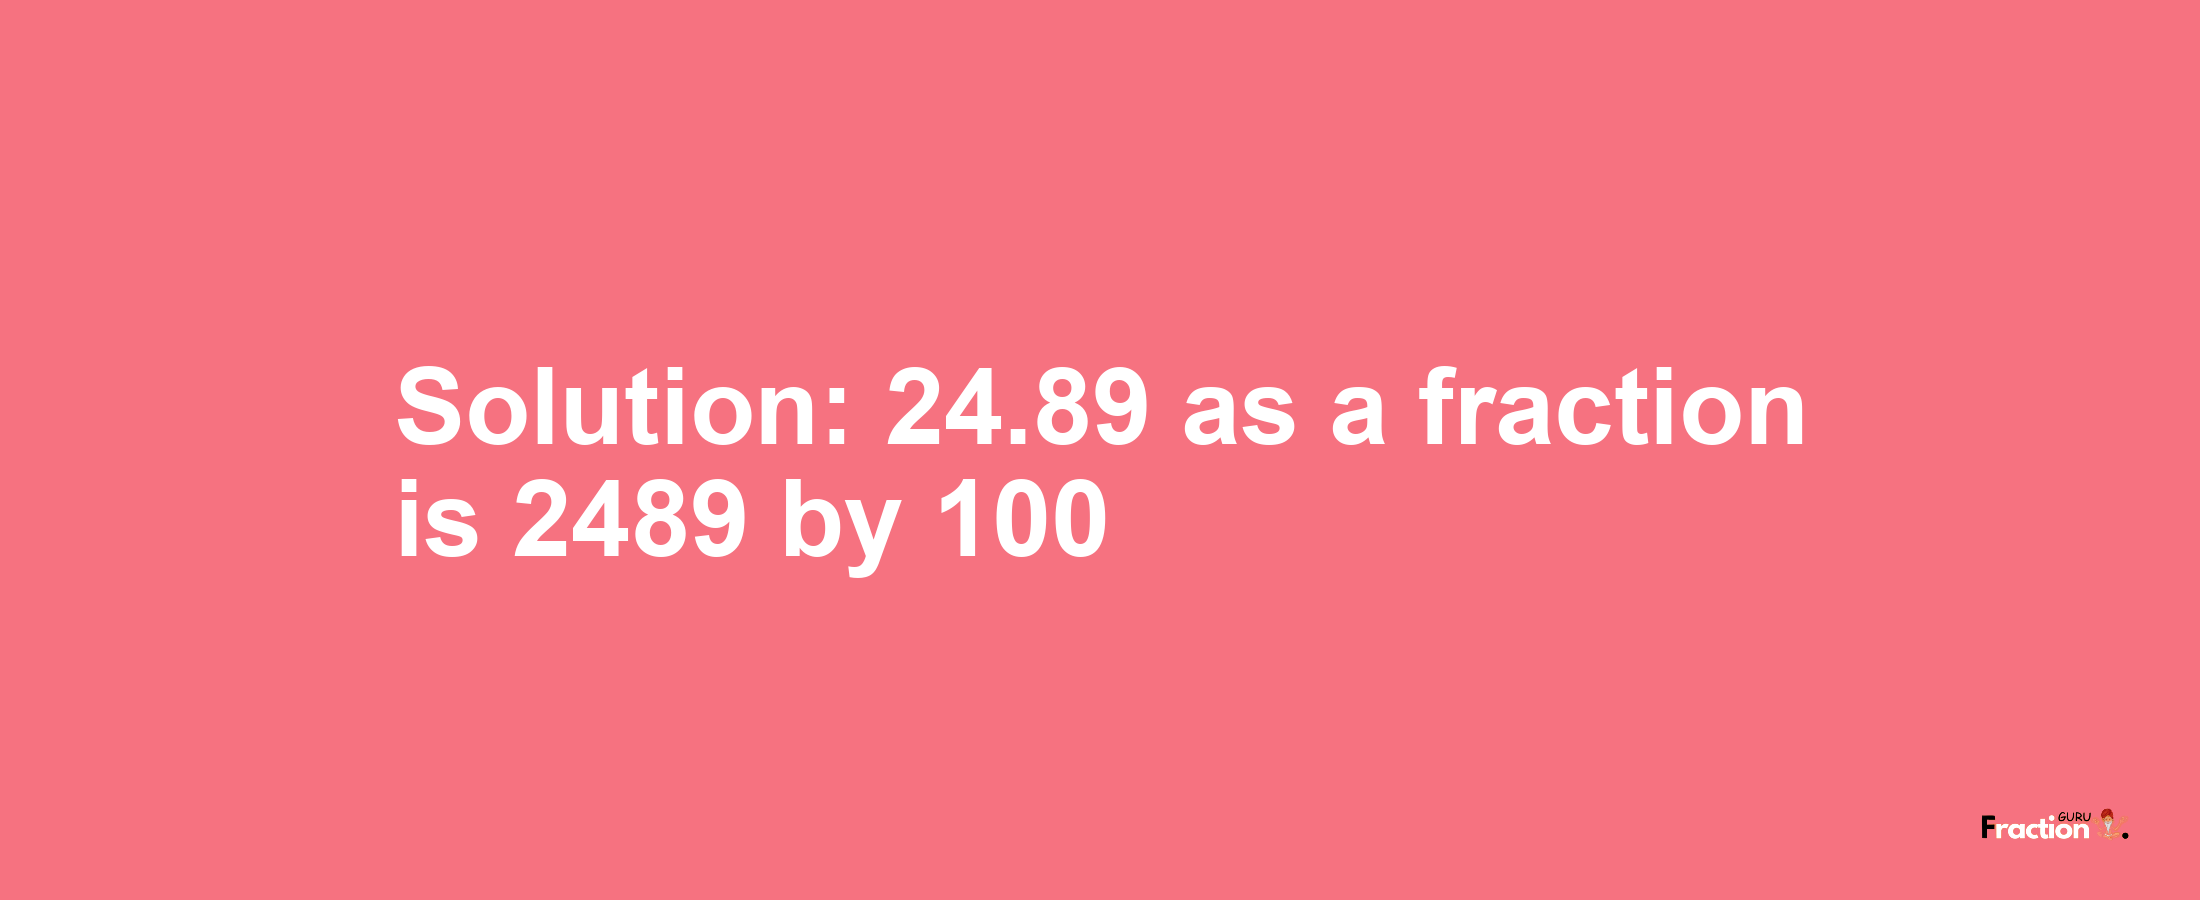 Solution:24.89 as a fraction is 2489/100